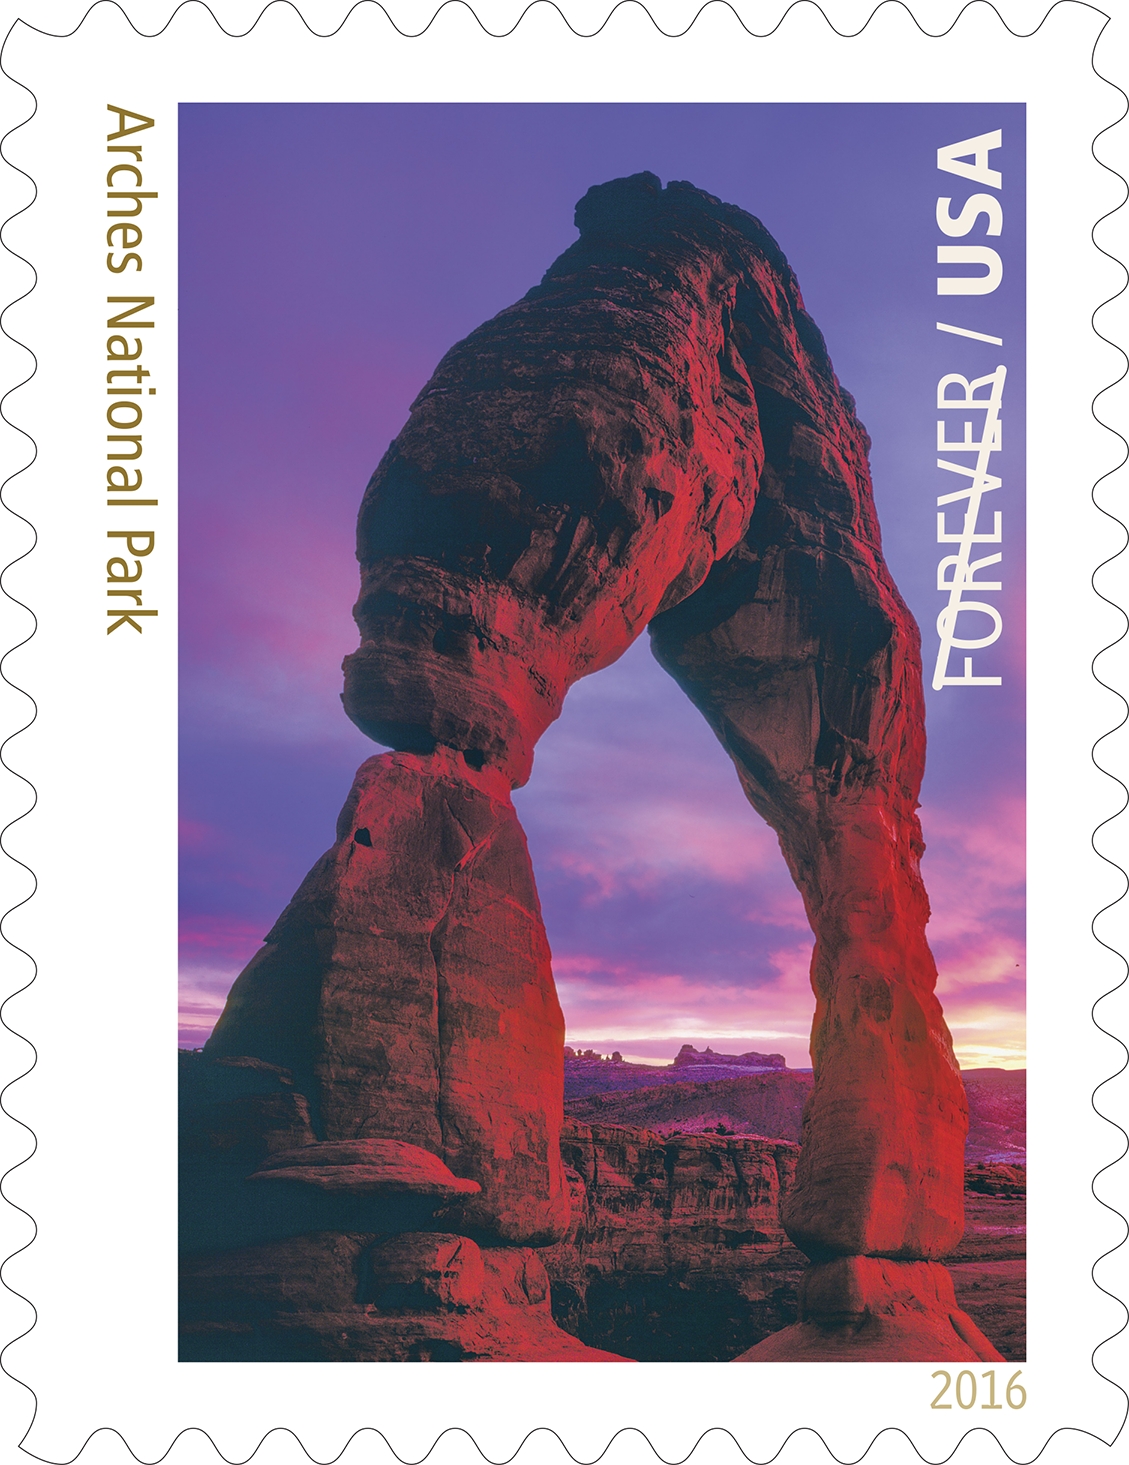 Arches Natl. Park 2nd of 16 stamps celebrating National Park Service centennial